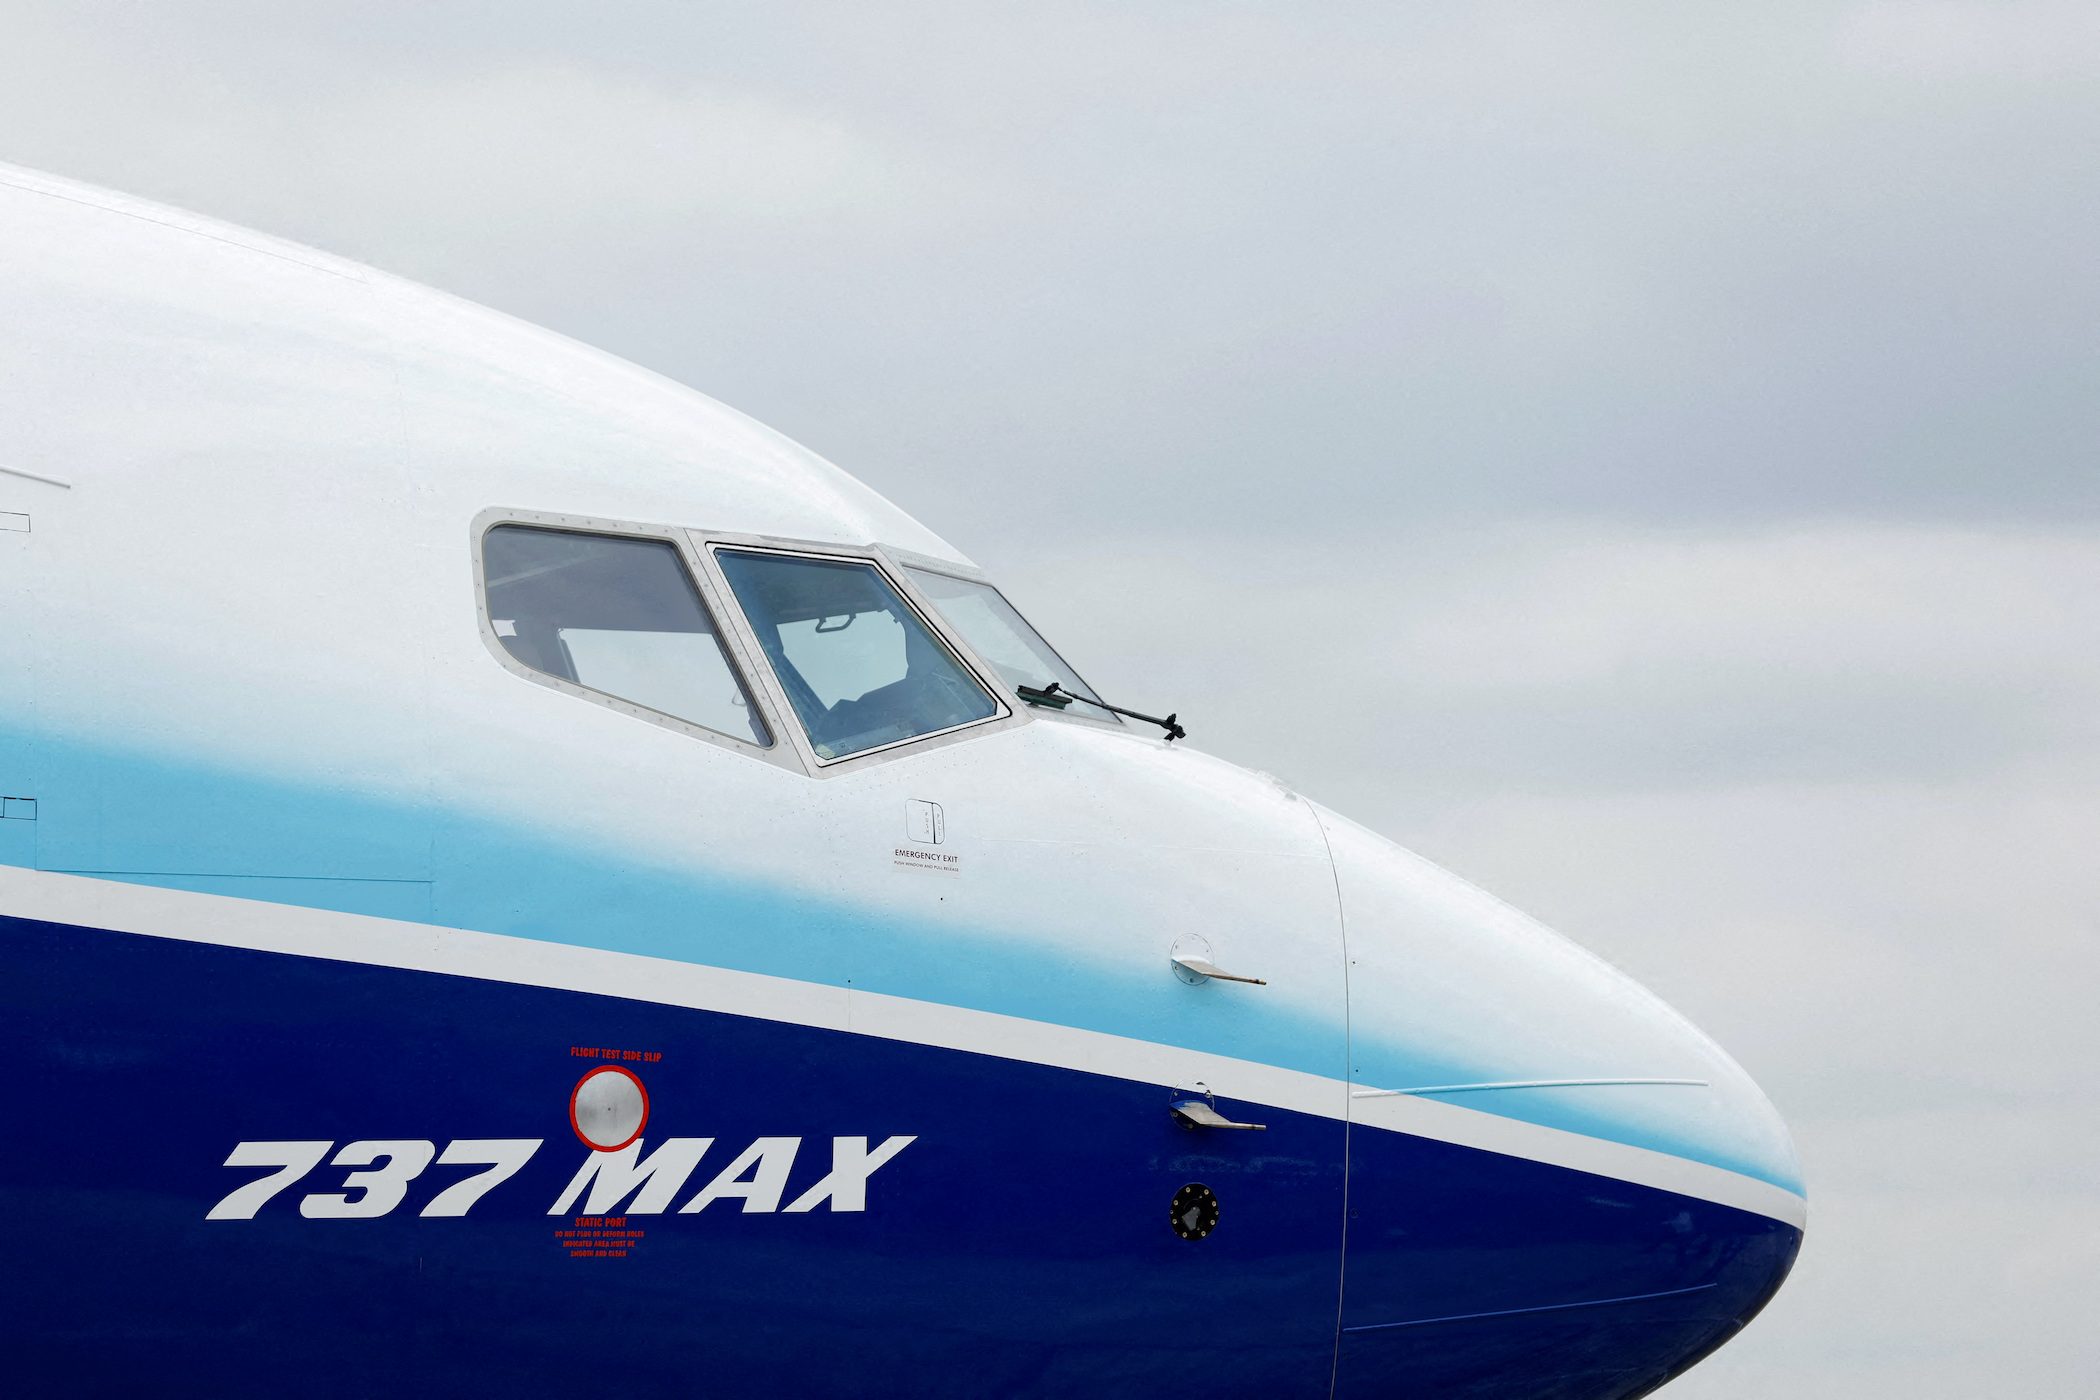 Boeing to pay $200 million to settle US charges it misled investors about 737 MAX